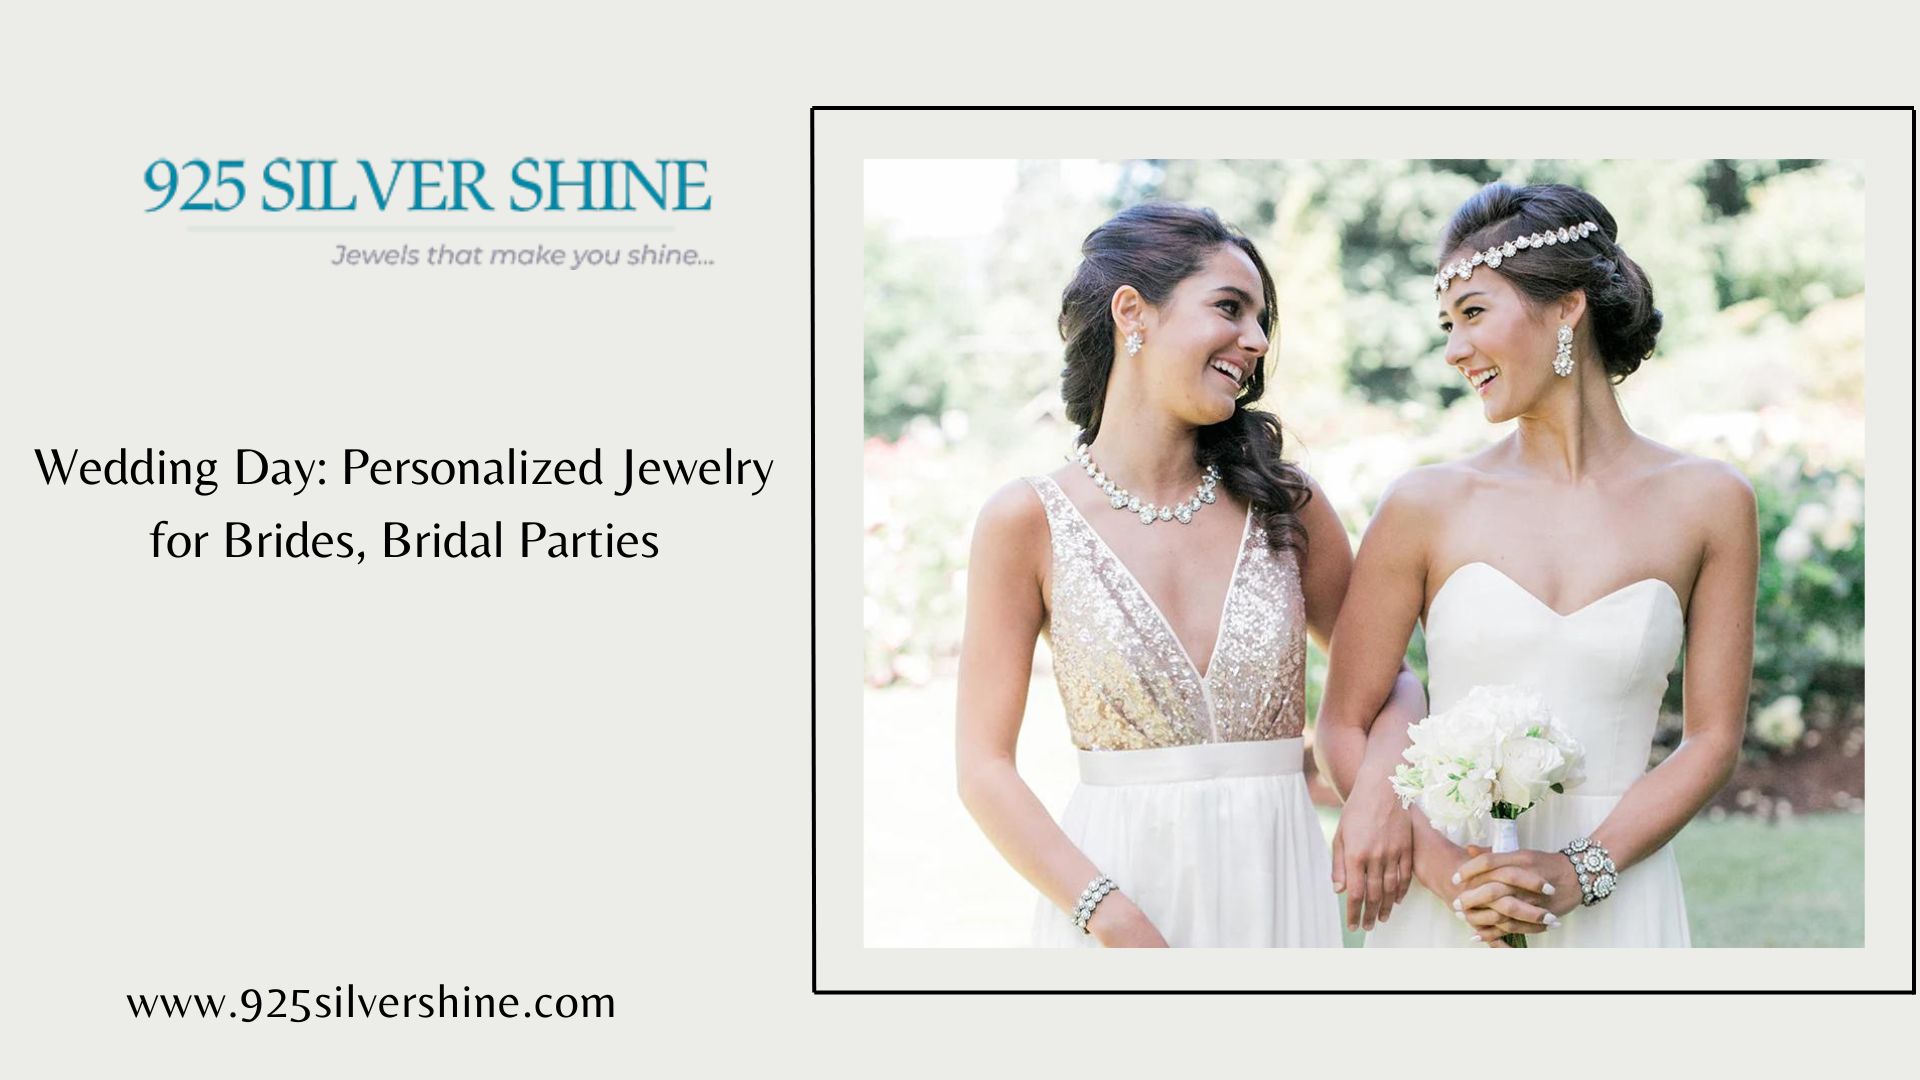 Wedding Day: Personalized Jewelry for Brides, Bridal Parties